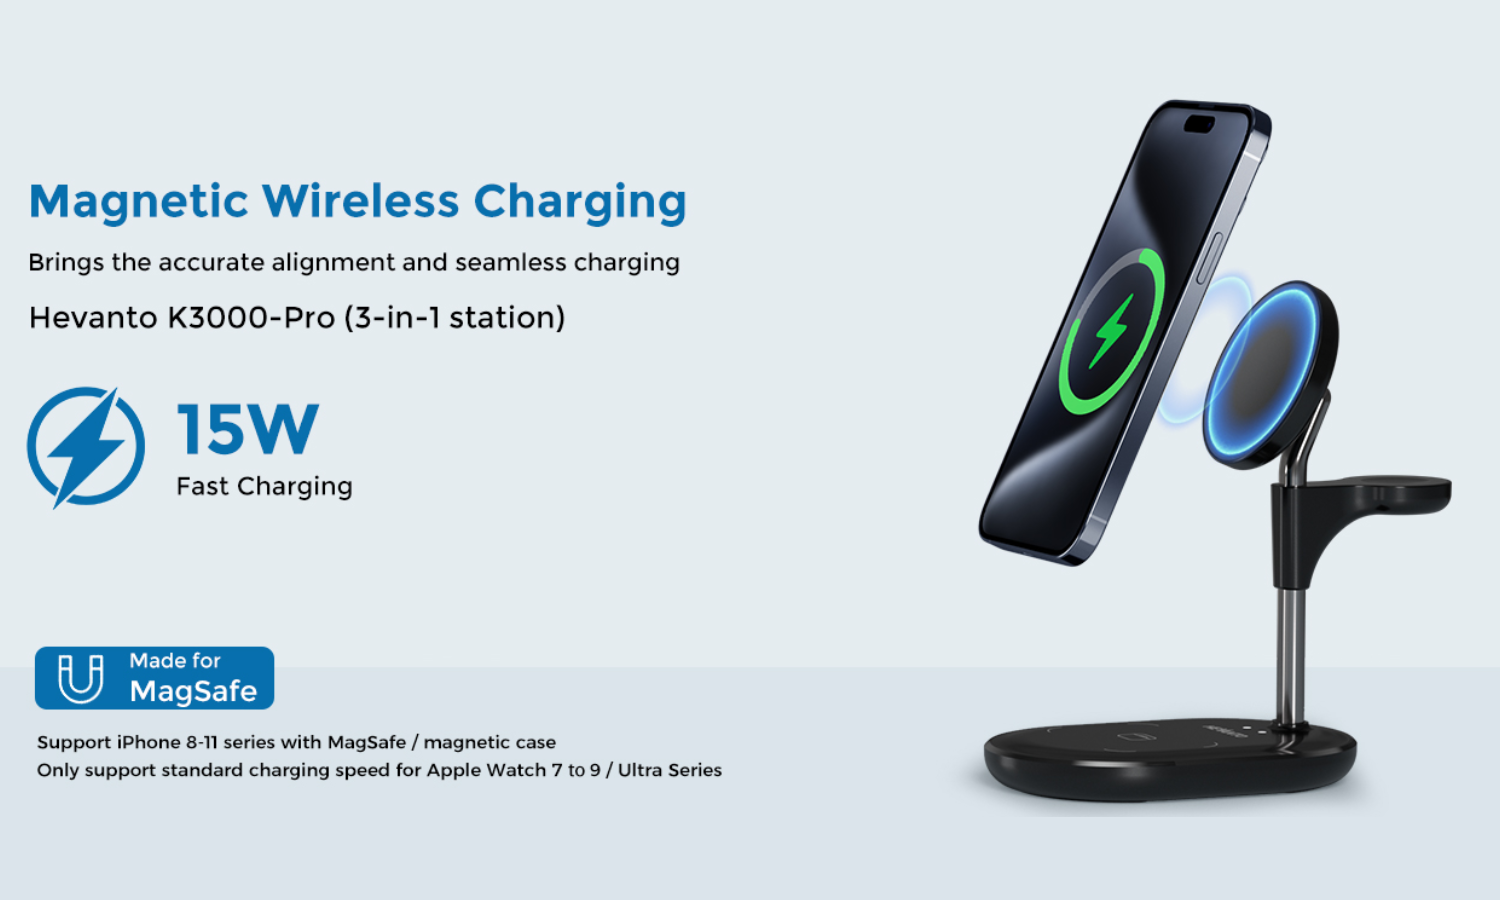 Hevanto 3 in 1 Wireless Charging Station